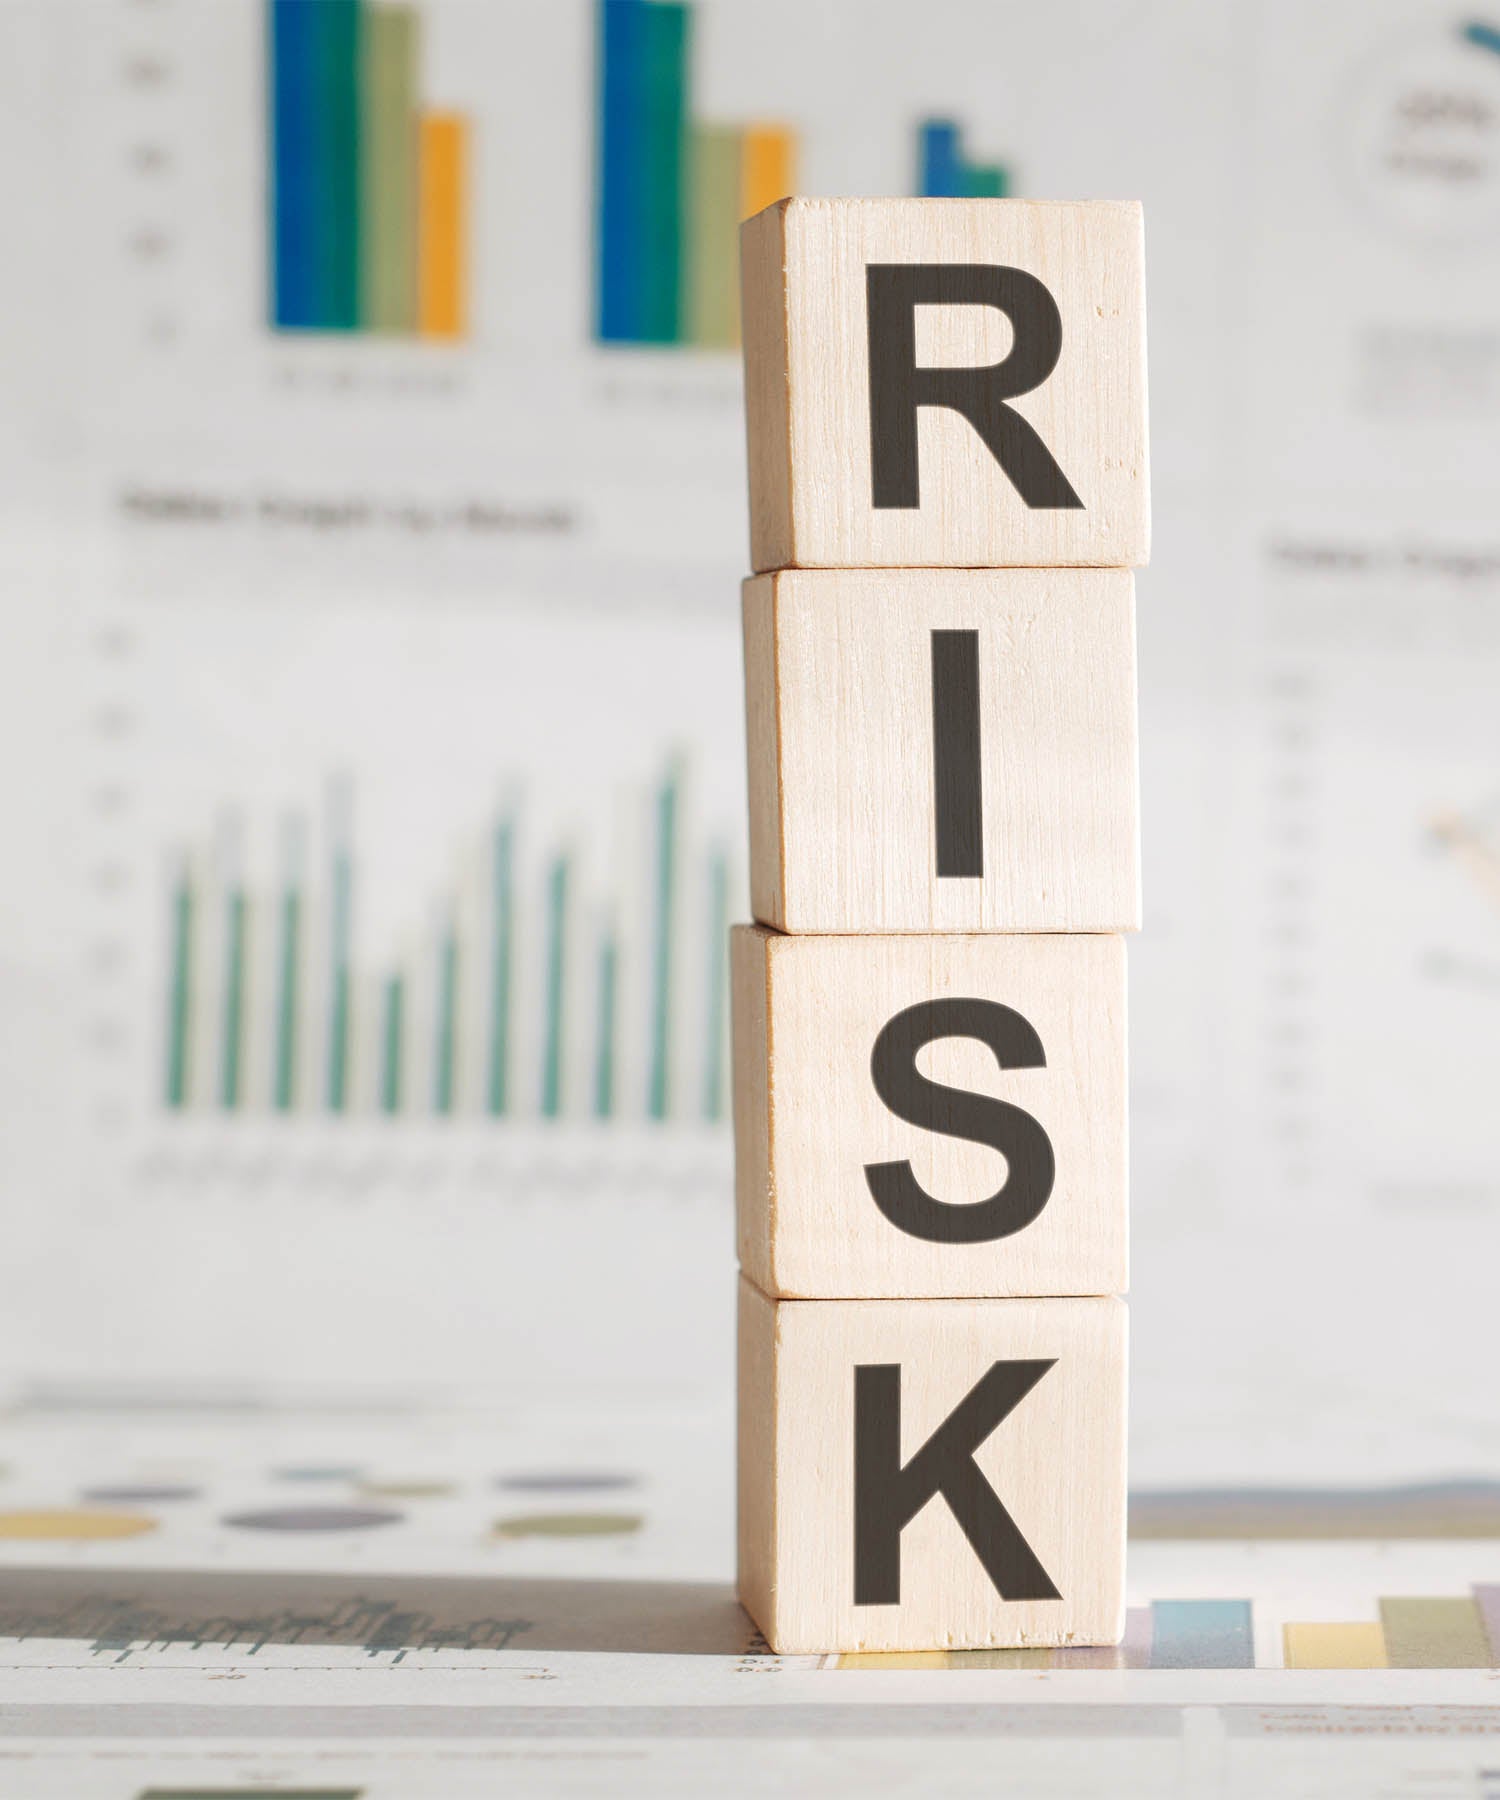 Wooden blocks spelling out the word 'risk' in relation to businesses.